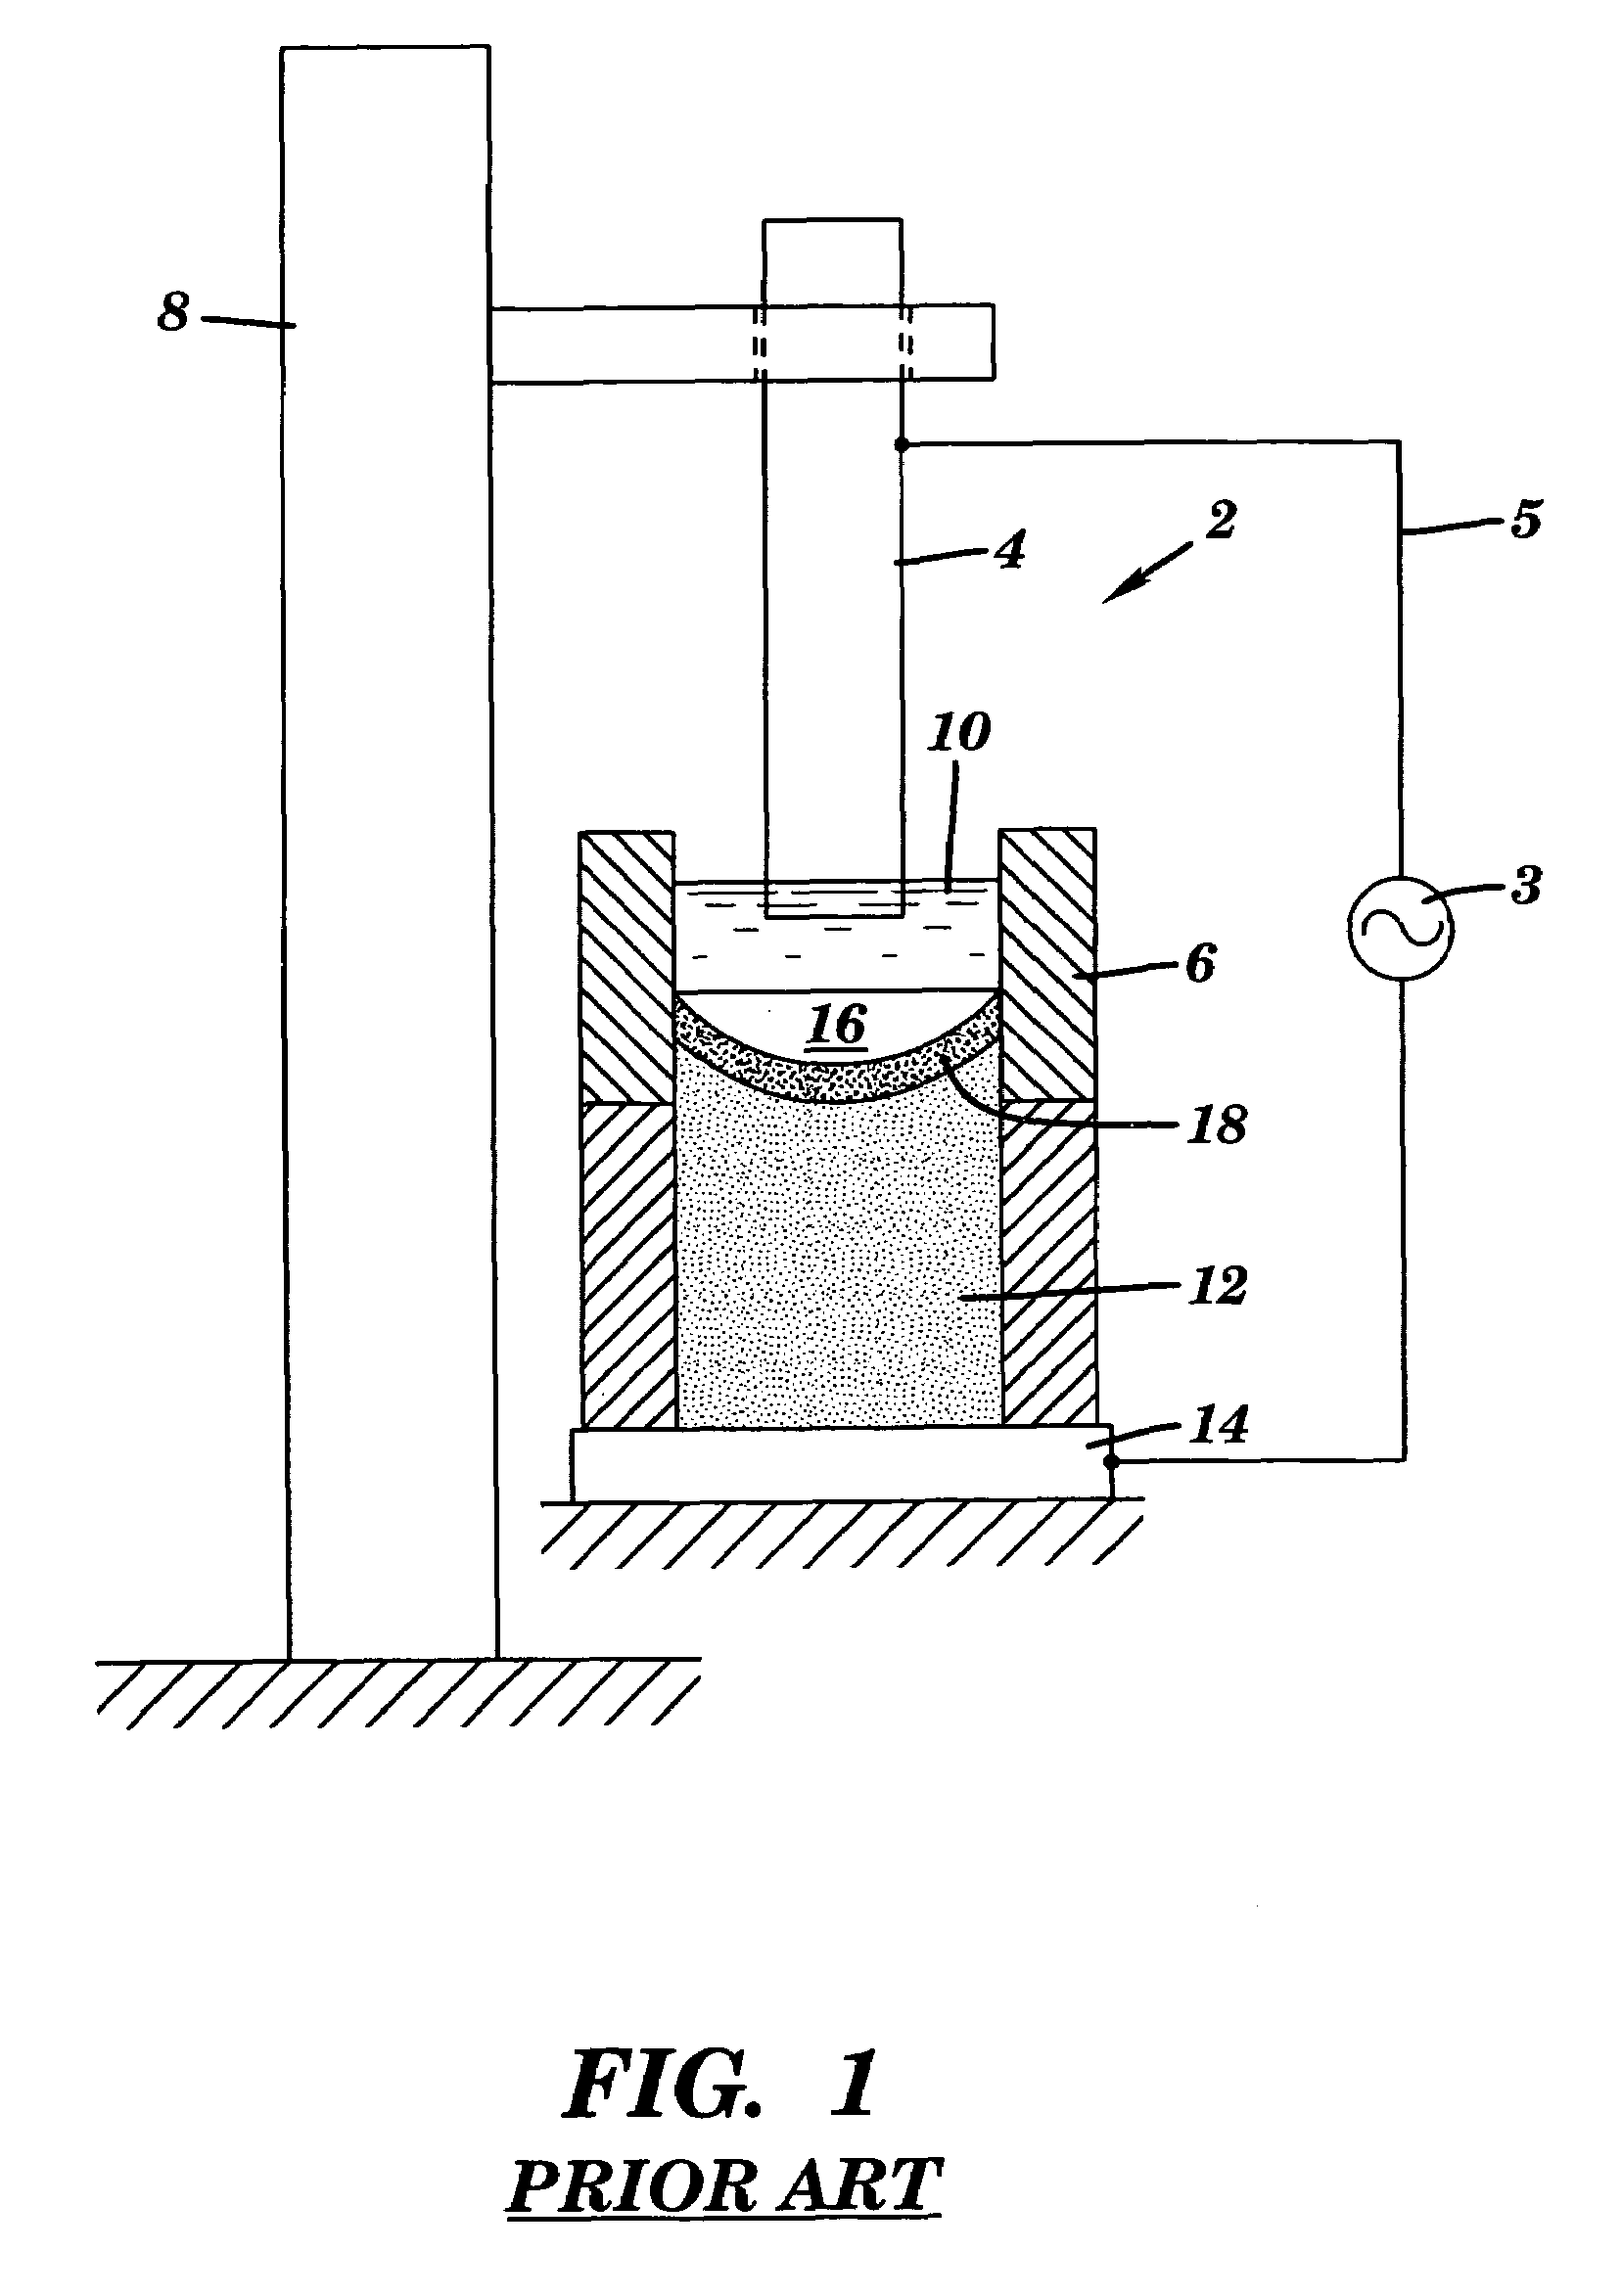 Apparatus for the production or refining of metals, and related processes